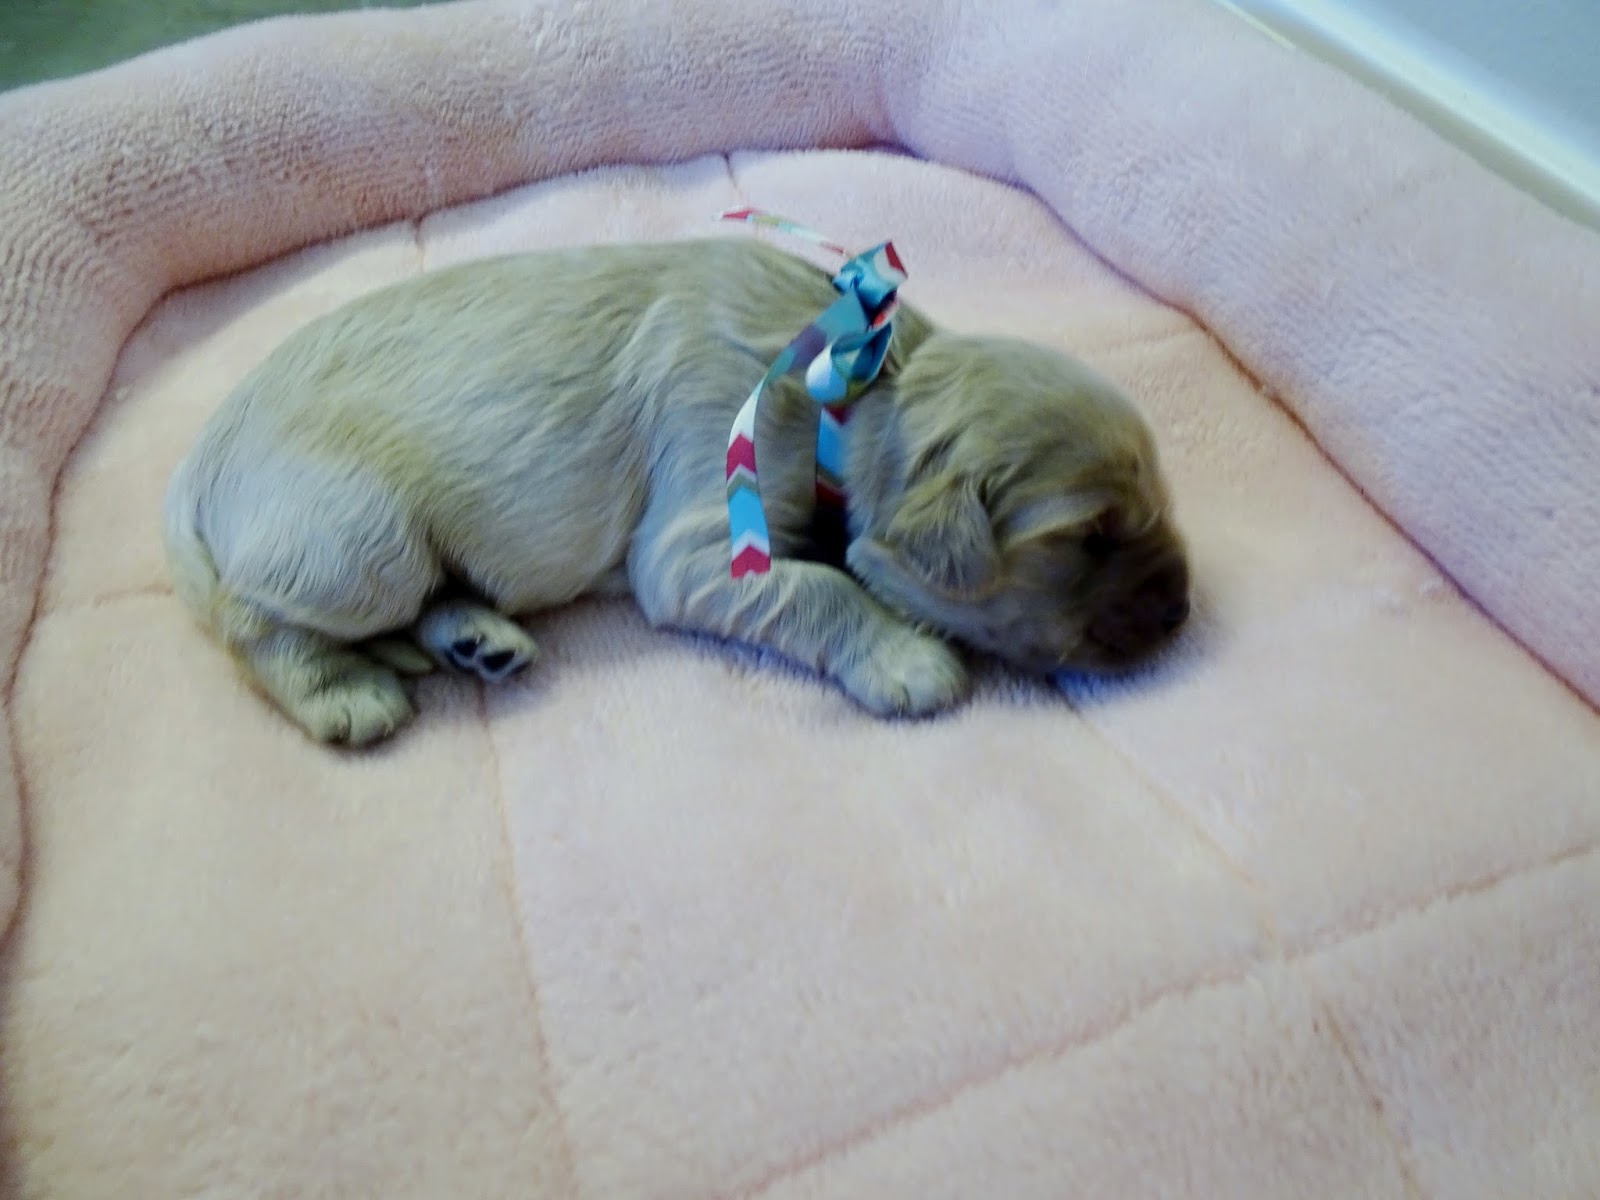 Sweetie Bell was the smallest born weighing in at 15 oz!